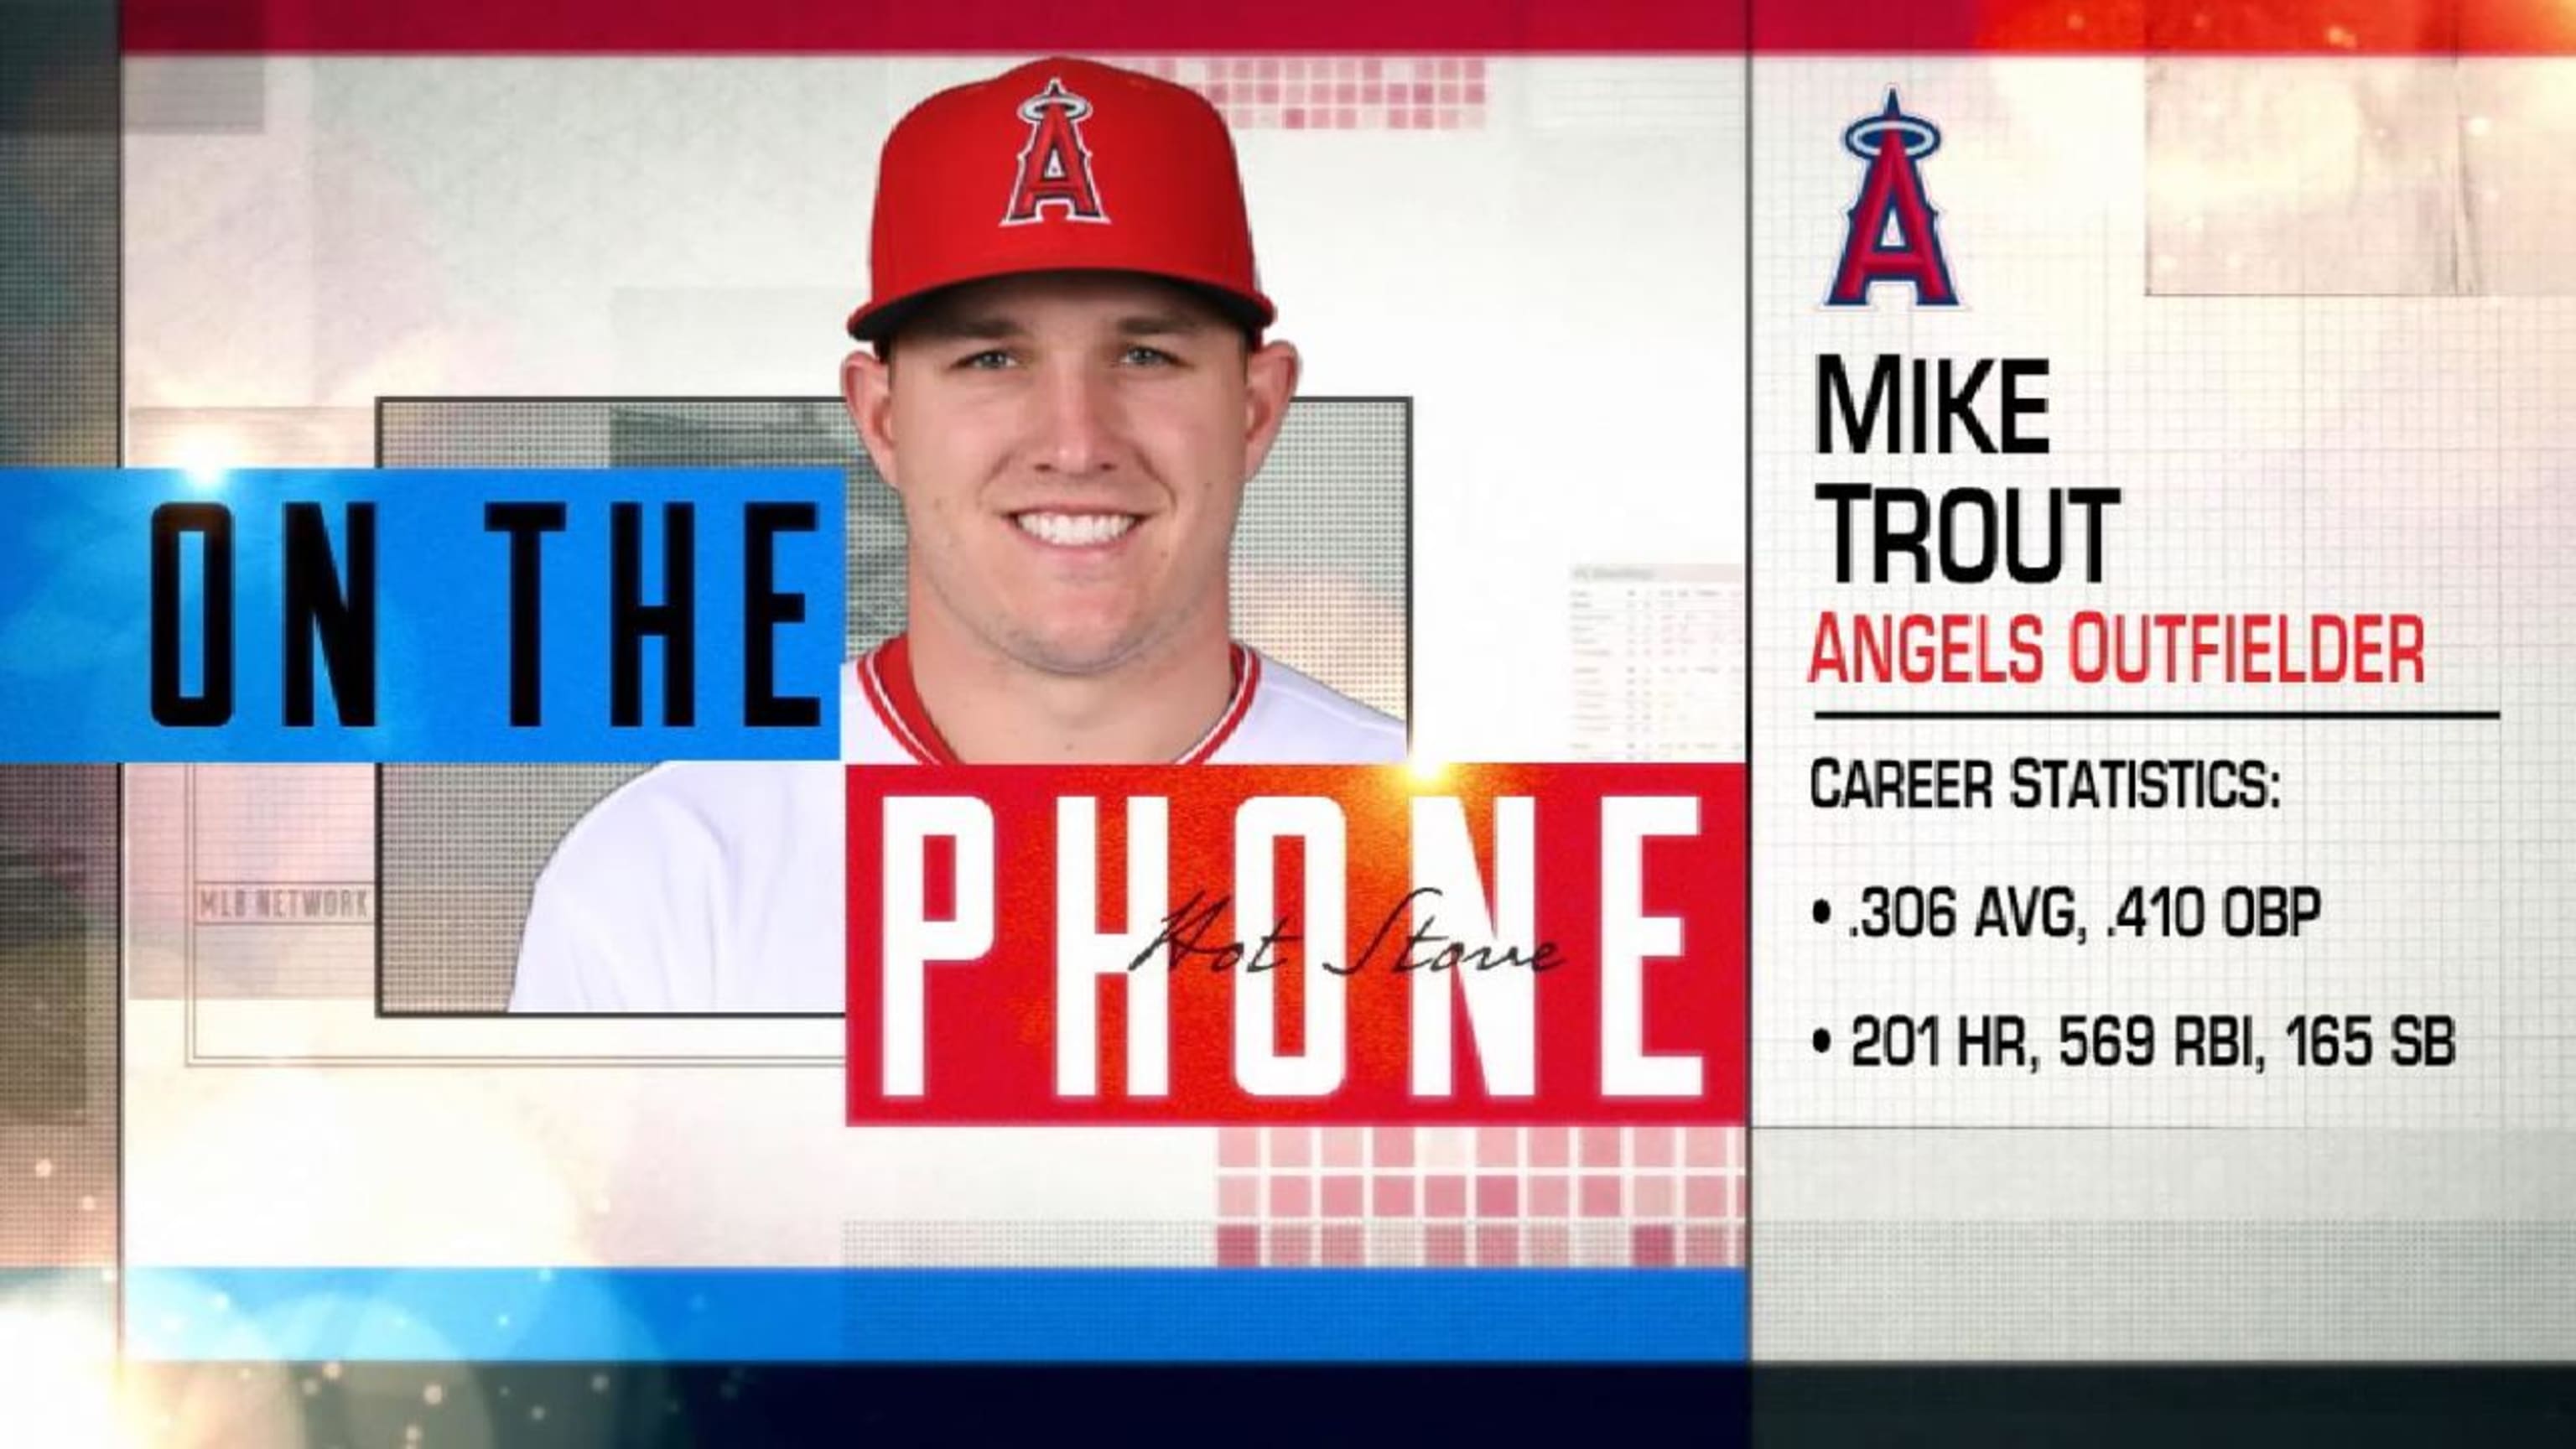 A souvenir for Mike Trout and his - Philadelphia Eagles